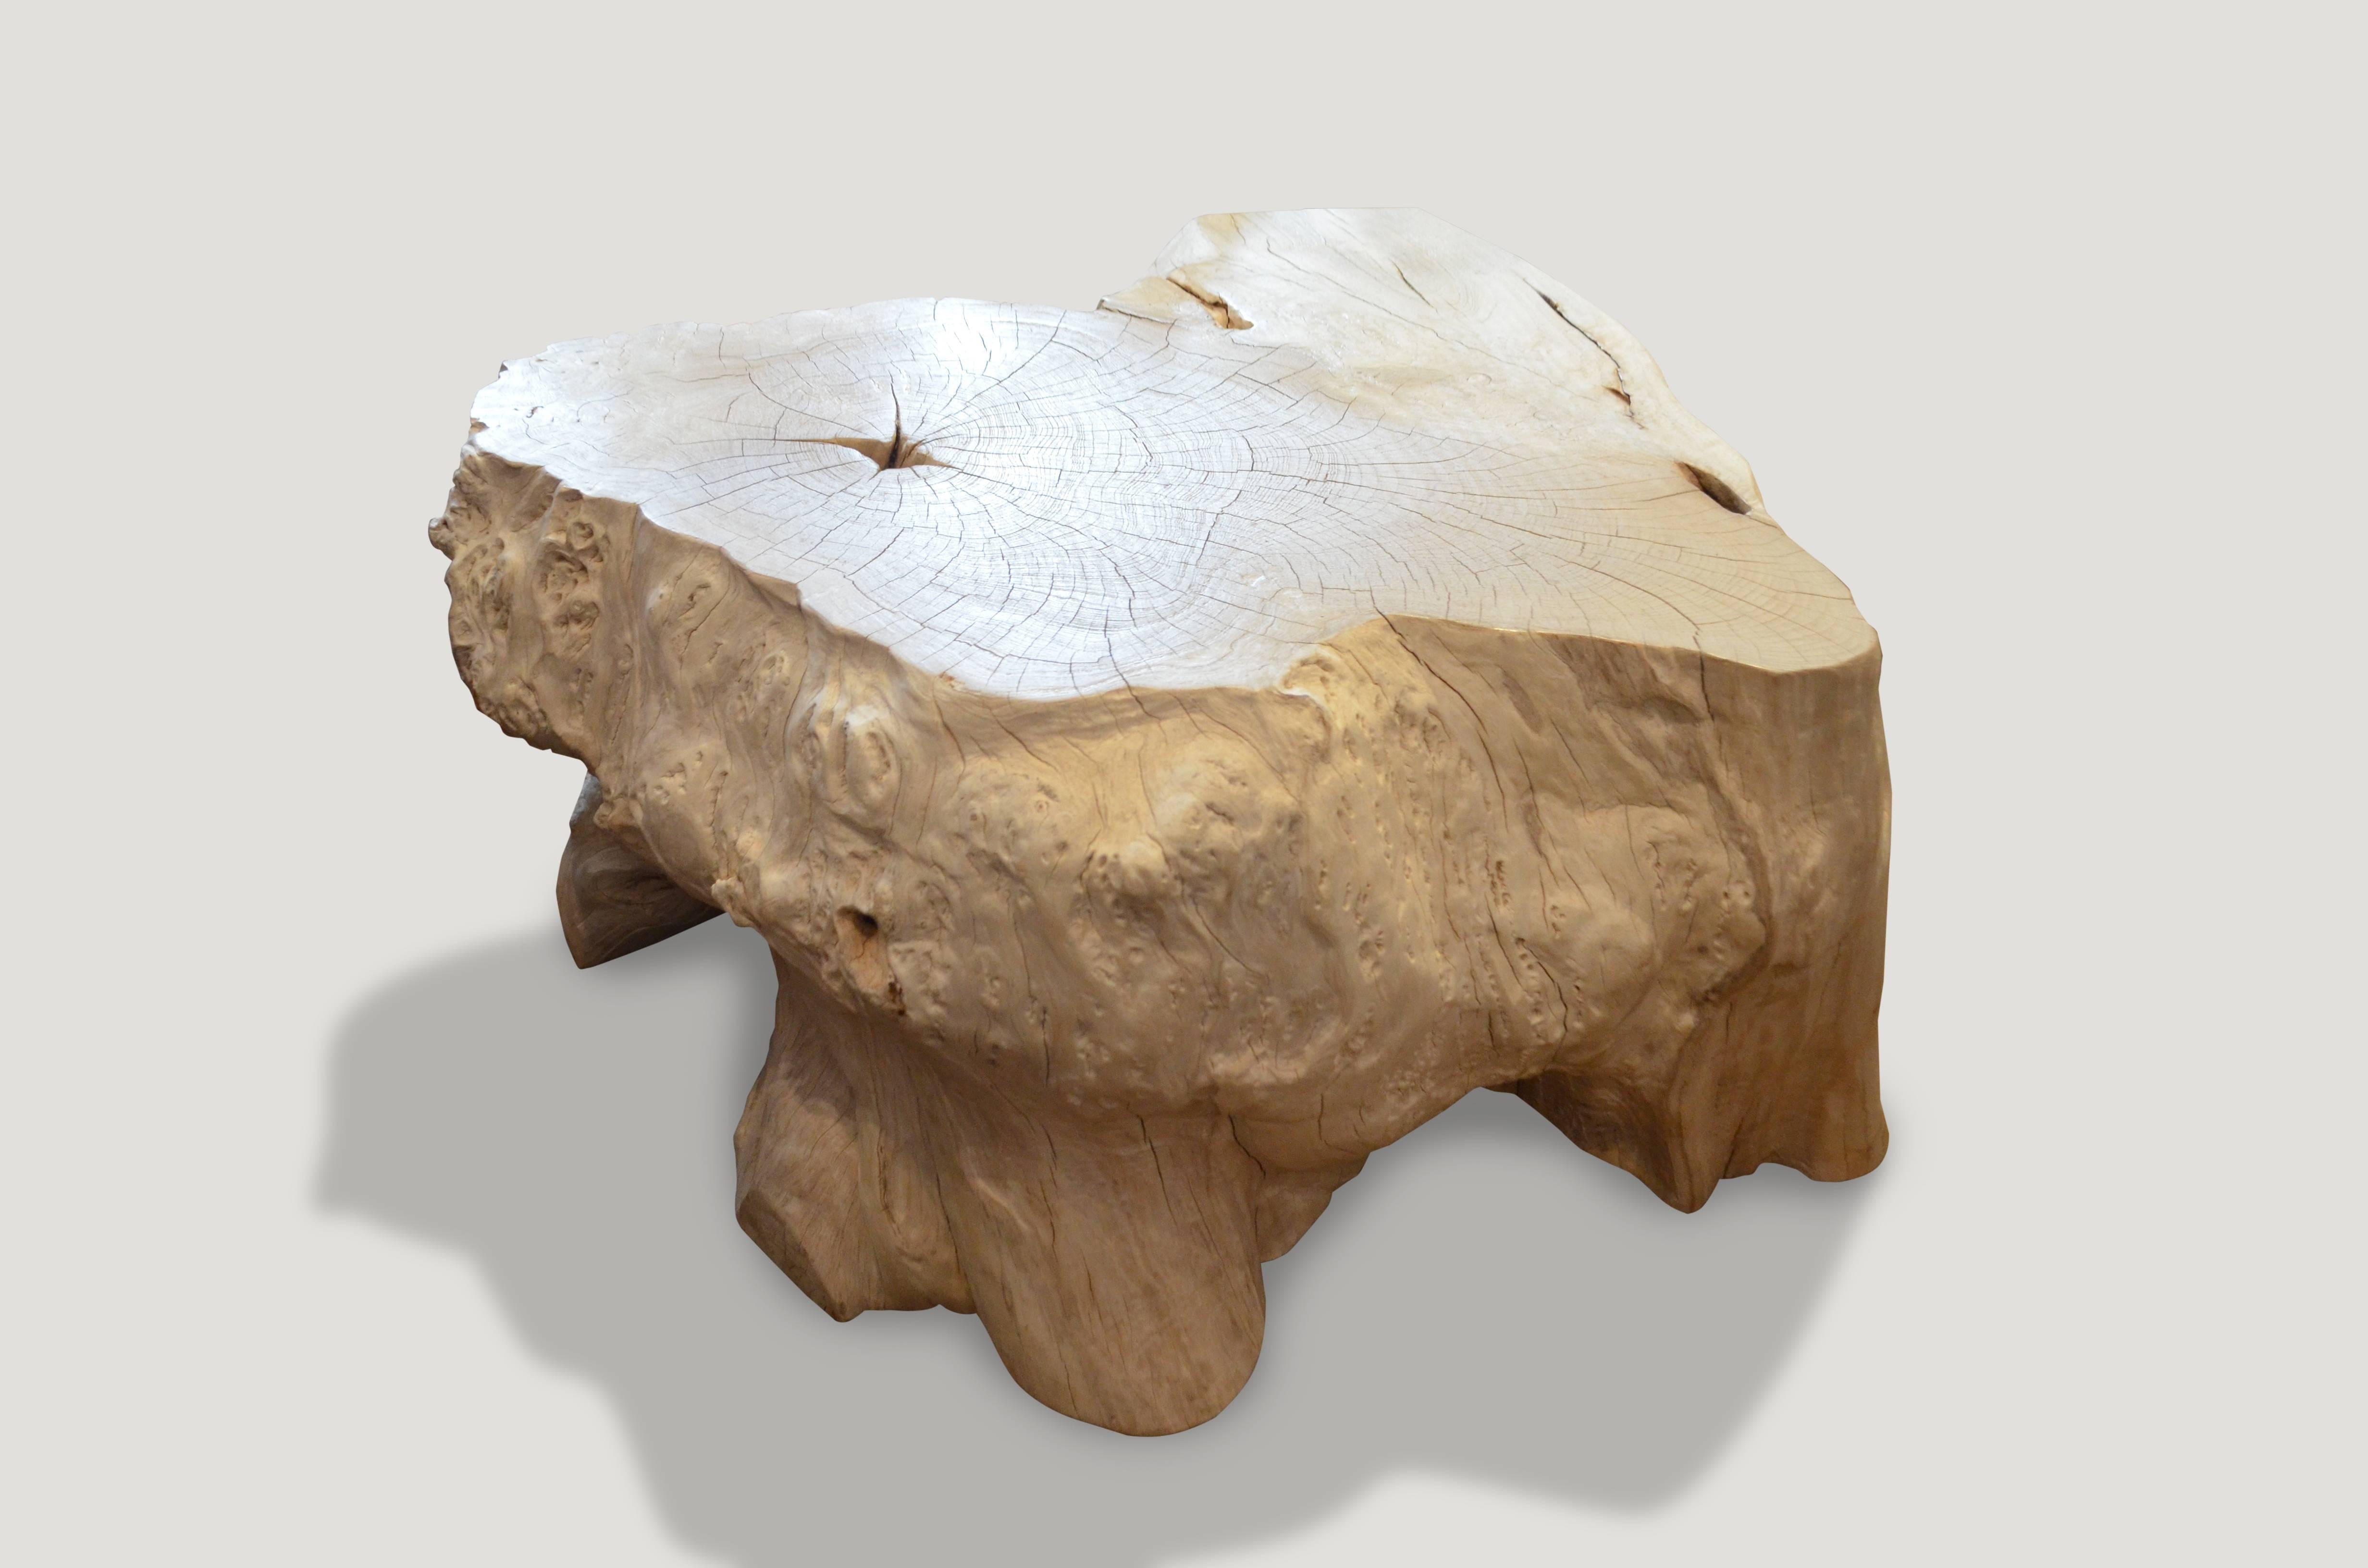 Reclaimed teak wood root, natural organic shape coffee table or side table. Organic is the new modern.

The St. Barts collection features an exciting new line of organic white wash and natural weathered teak furniture. The reclaimed teak is left